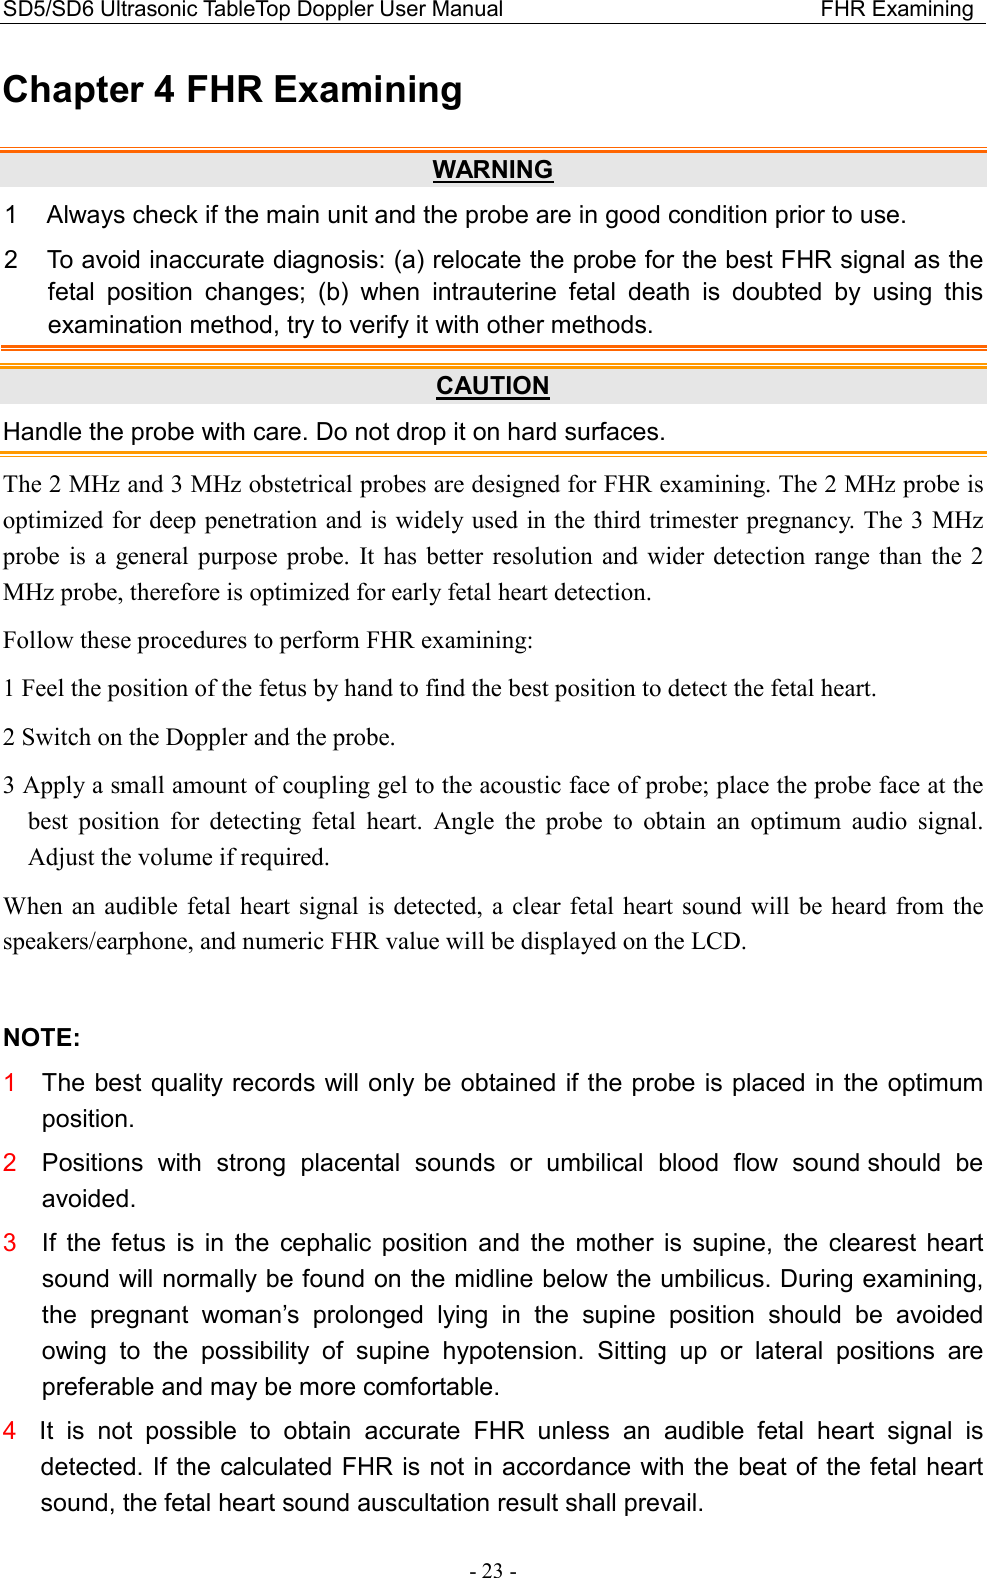 SD5/SD6 Ultrasonic TableTop Doppler User Manual                                                          FHR Examining - 23 - Chapter 4 FHR Examining WARNING 1  Always check if the main unit and the probe are in good condition prior to use. 2  To avoid inaccurate diagnosis: (a) relocate the probe for the best FHR signal as the fetal  position  changes;  (b)  when  intrauterine  fetal  death  is  doubted  by  using  this examination method, try to verify it with other methods. CAUTION Handle the probe with care. Do not drop it on hard surfaces. The 2 MHz and 3 MHz obstetrical probes are designed for FHR examining. The 2 MHz probe is optimized for deep penetration and is widely used in the third trimester pregnancy. The 3 MHz probe  is  a general  purpose  probe.  It has  better  resolution  and  wider detection  range  than the  2 MHz probe, therefore is optimized for early fetal heart detection. Follow these procedures to perform FHR examining: 1 Feel the position of the fetus by hand to find the best position to detect the fetal heart.   2 Switch on the Doppler and the probe. 3 Apply a small amount of coupling gel to the acoustic face of probe; place the probe face at the best  position  for  detecting  fetal  heart.  Angle  the  probe  to  obtain  an  optimum  audio  signal. Adjust the volume if required. When  an  audible  fetal  heart signal is  detected,  a clear fetal heart  sound  will  be heard from the speakers/earphone, and numeric FHR value will be displayed on the LCD.  NOTE: 1  The best quality records will only be obtained if the probe is placed in the optimum position. 2  Positions  with  strong  placental  sounds  or  umbilical  blood  flow  sound should  be avoided. 3  If  the  fetus  is  in  the  cephalic  position  and  the  mother  is  supine,  the  clearest  heart sound will normally be found on the midline below the umbilicus. During examining, the  pregnant  woman’s  prolonged  lying  in  the  supine  position  should  be  avoided owing  to  the  possibility  of  supine  hypotension.  Sitting  up  or  lateral  positions  are preferable and may be more comfortable. 4  It  is  not  possible  to  obtain  accurate  FHR  unless  an  audible  fetal  heart  signal  is detected. If the calculated FHR is not in accordance with the beat of the fetal heart sound, the fetal heart sound auscultation result shall prevail. 